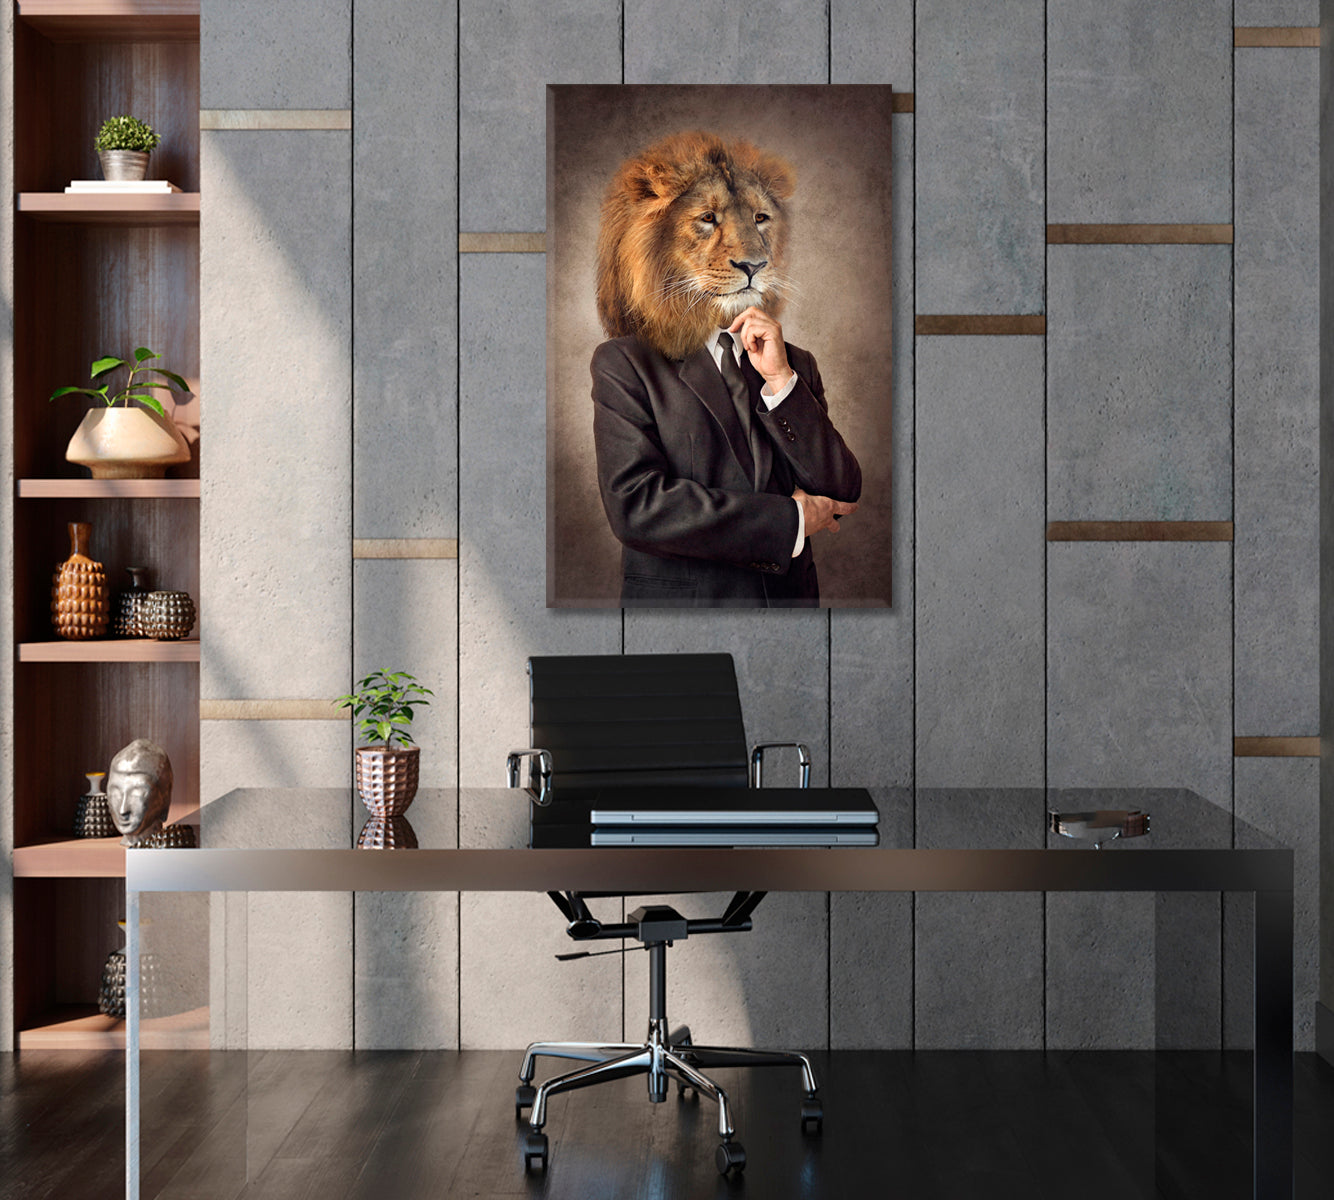 Lion in Suit Lion-headed Man Human Animals Poster Office Wall Art Canvas Print Artesty   